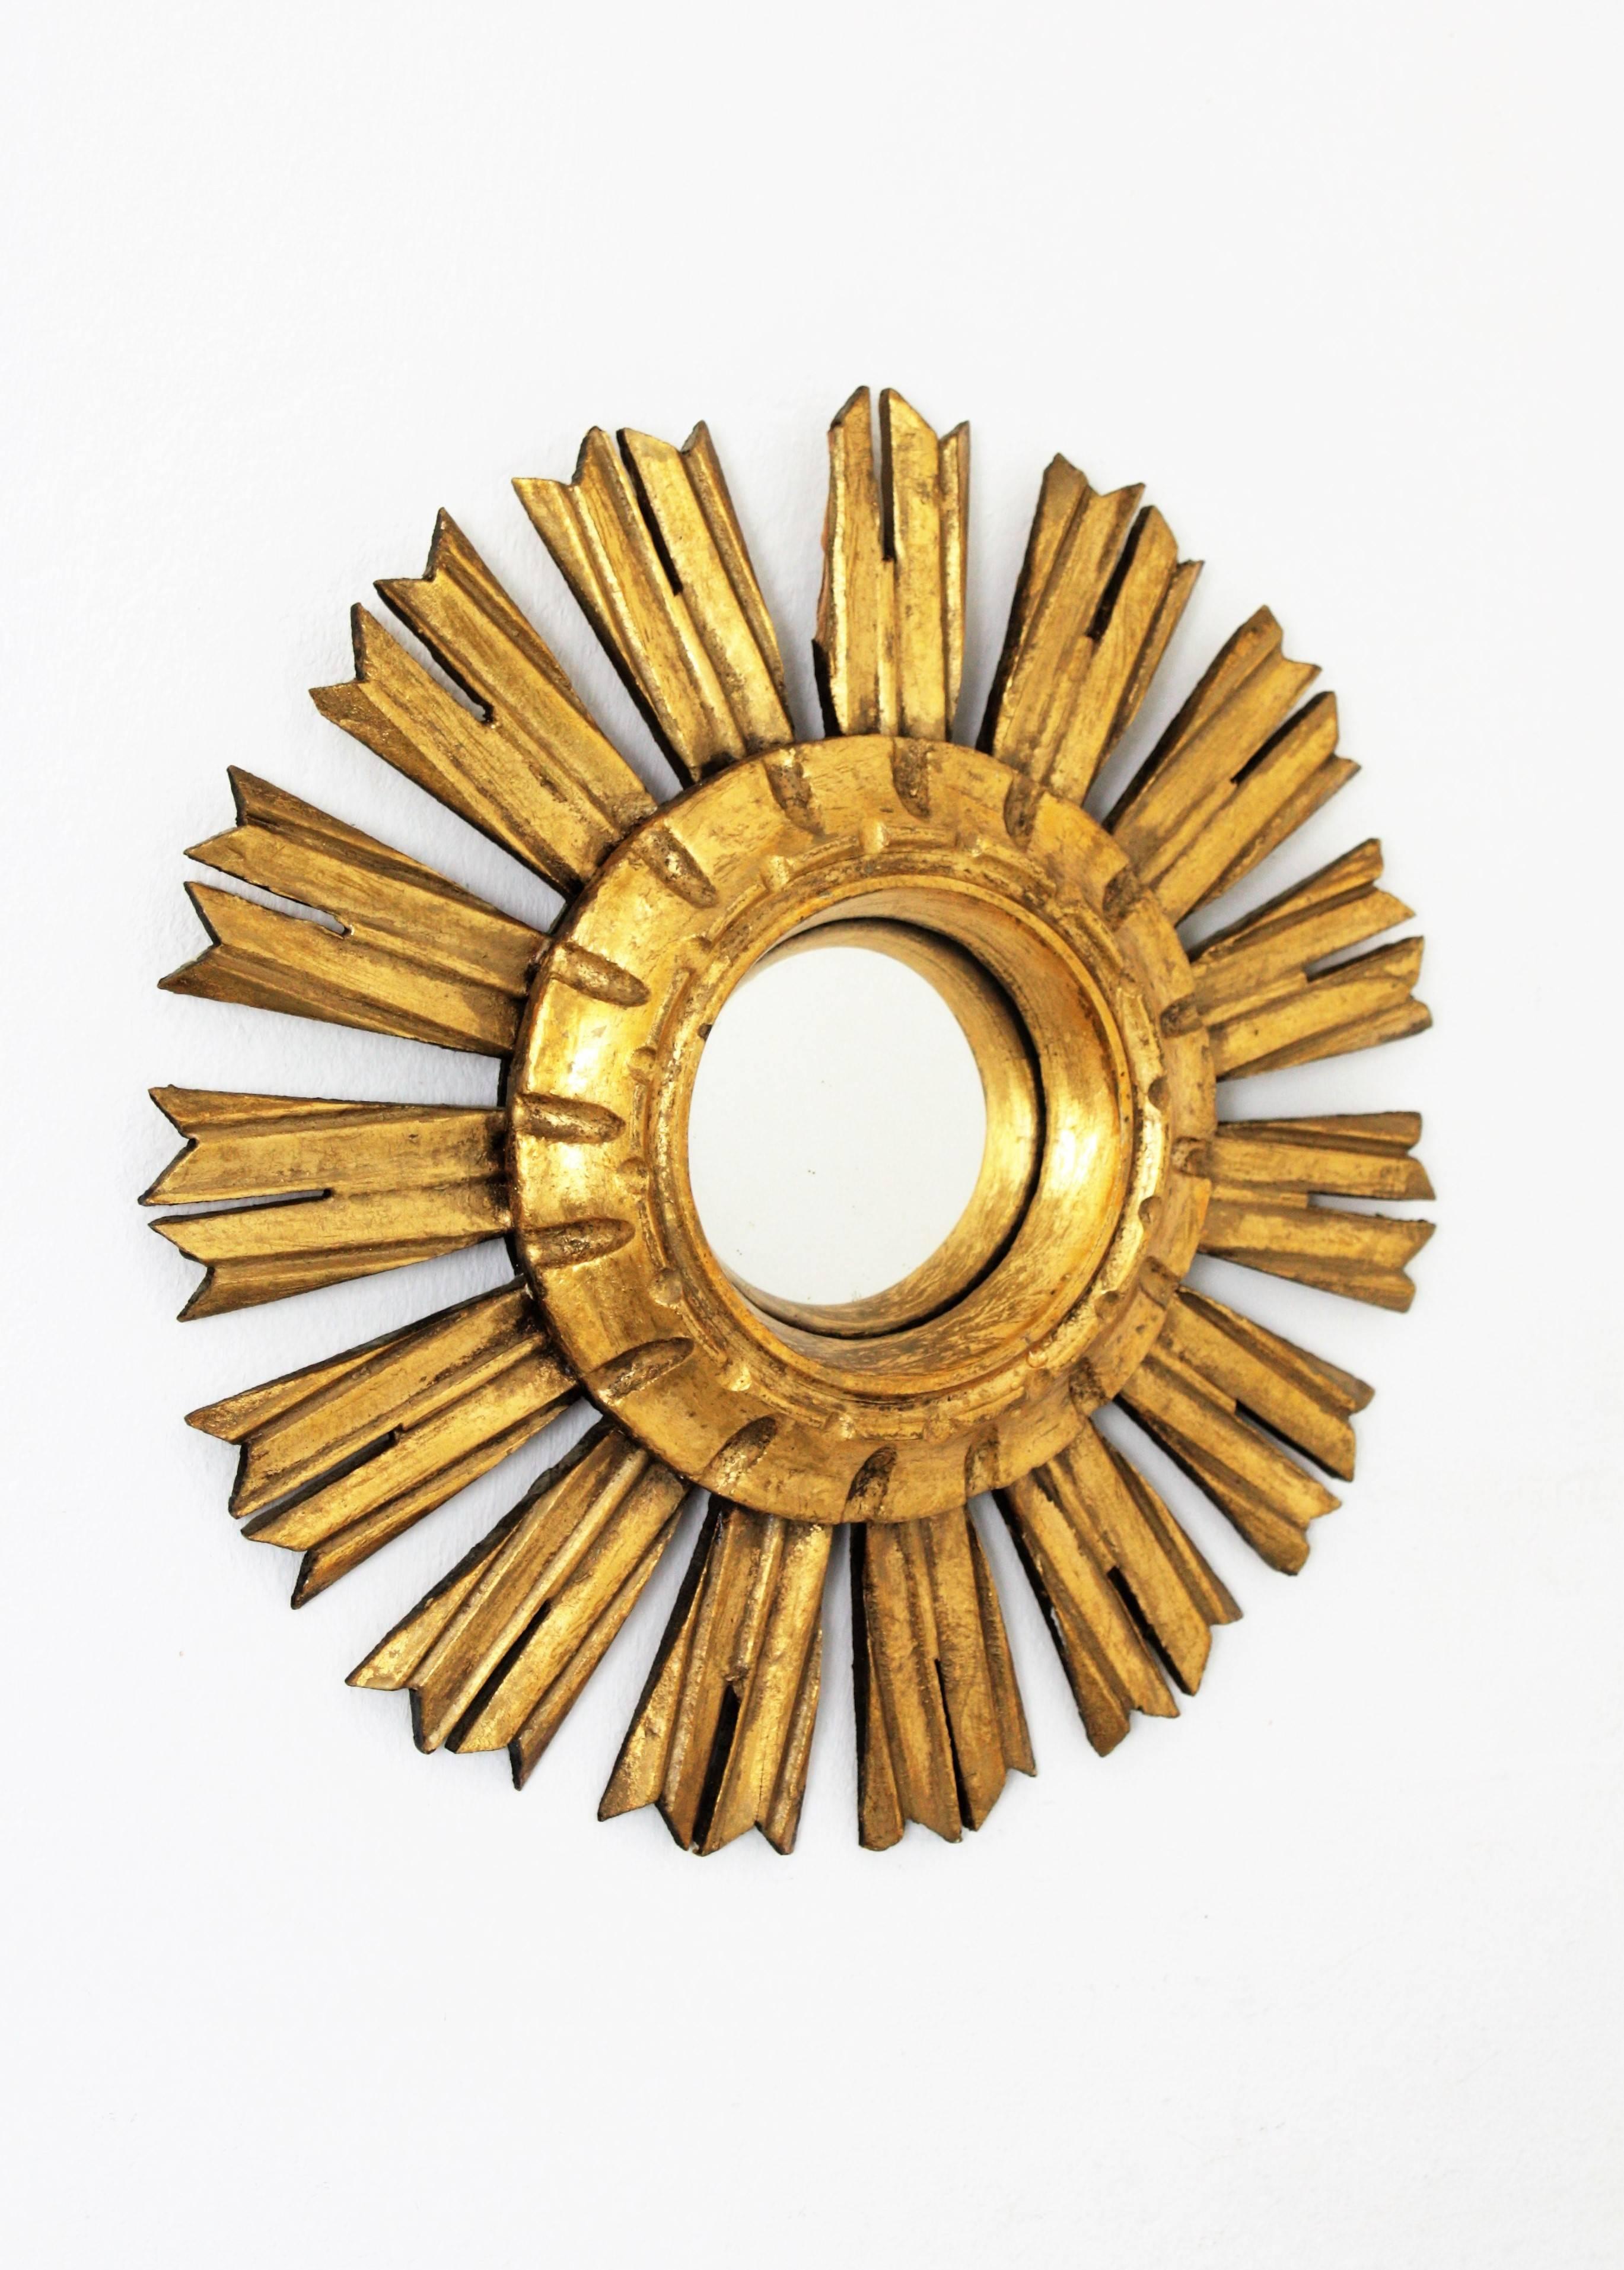 Lovely mini sized Baroque style giltwood sunburst mirror with convex glass. This small mirror is perfect to place alone, but its unusual size makes the piece highly decorative to place it with sunburst mirrors in other sizes creating a wall